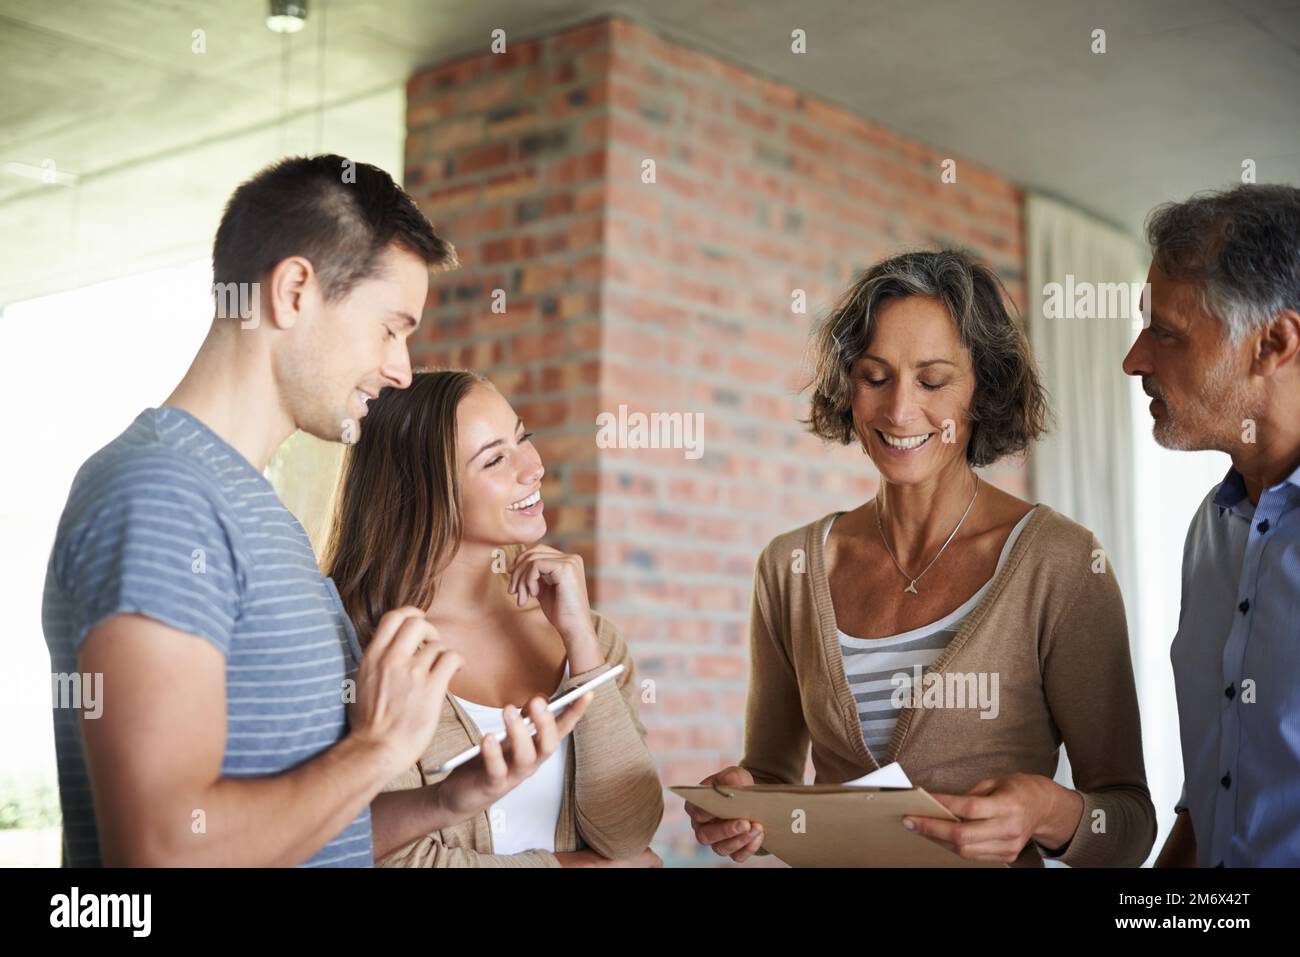 Catching up with mom and dad. A happy family with adult children standing and chatting in their home. Stock Photo